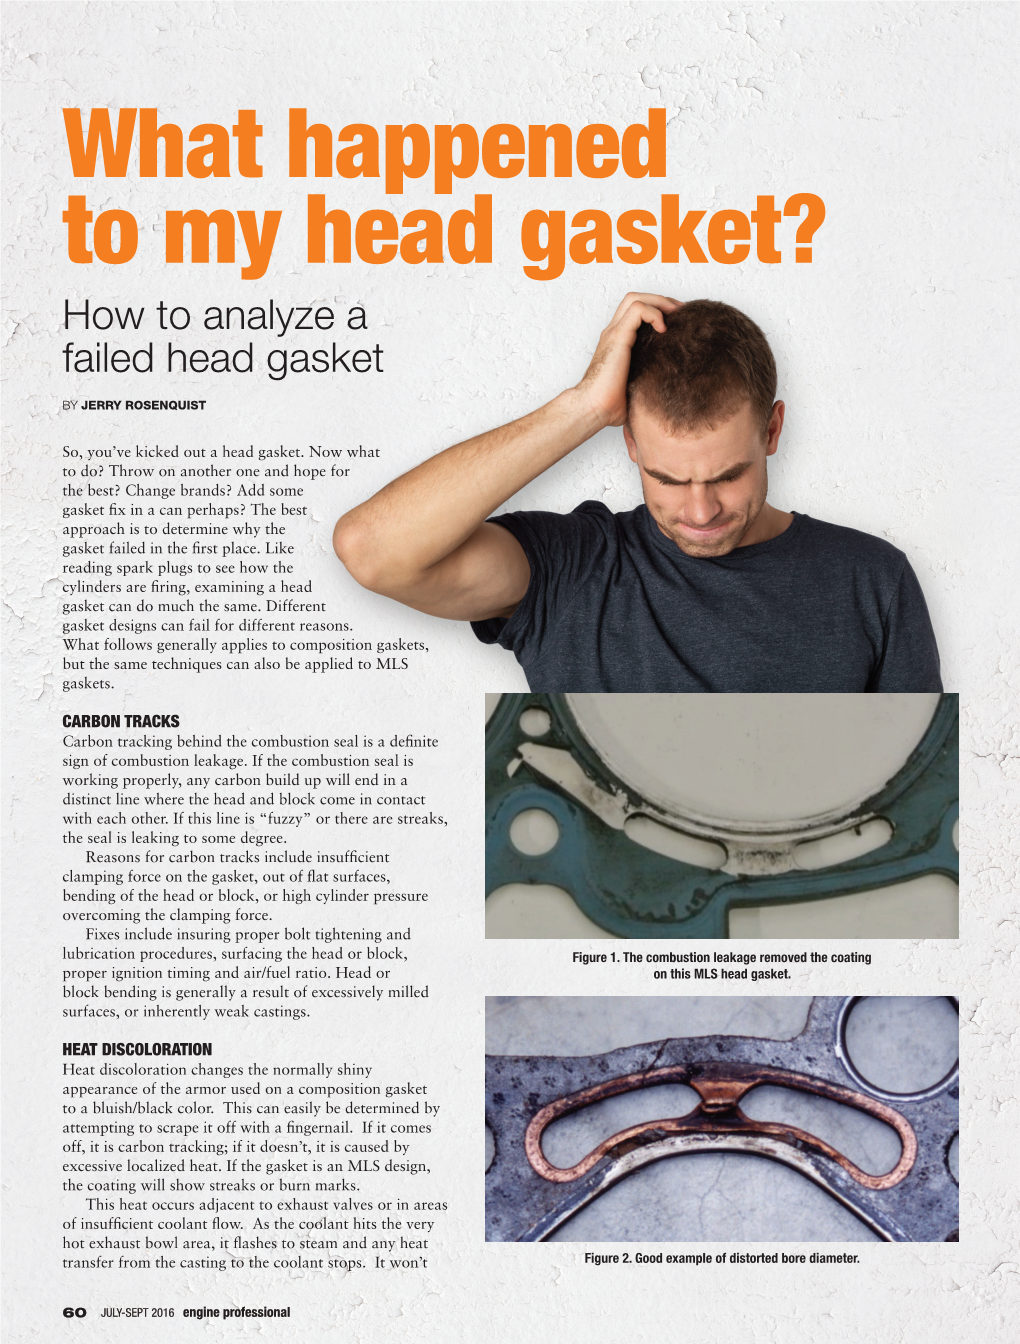 What Happened to My Head Gasket? How to Analyze a Failed Head Gasket